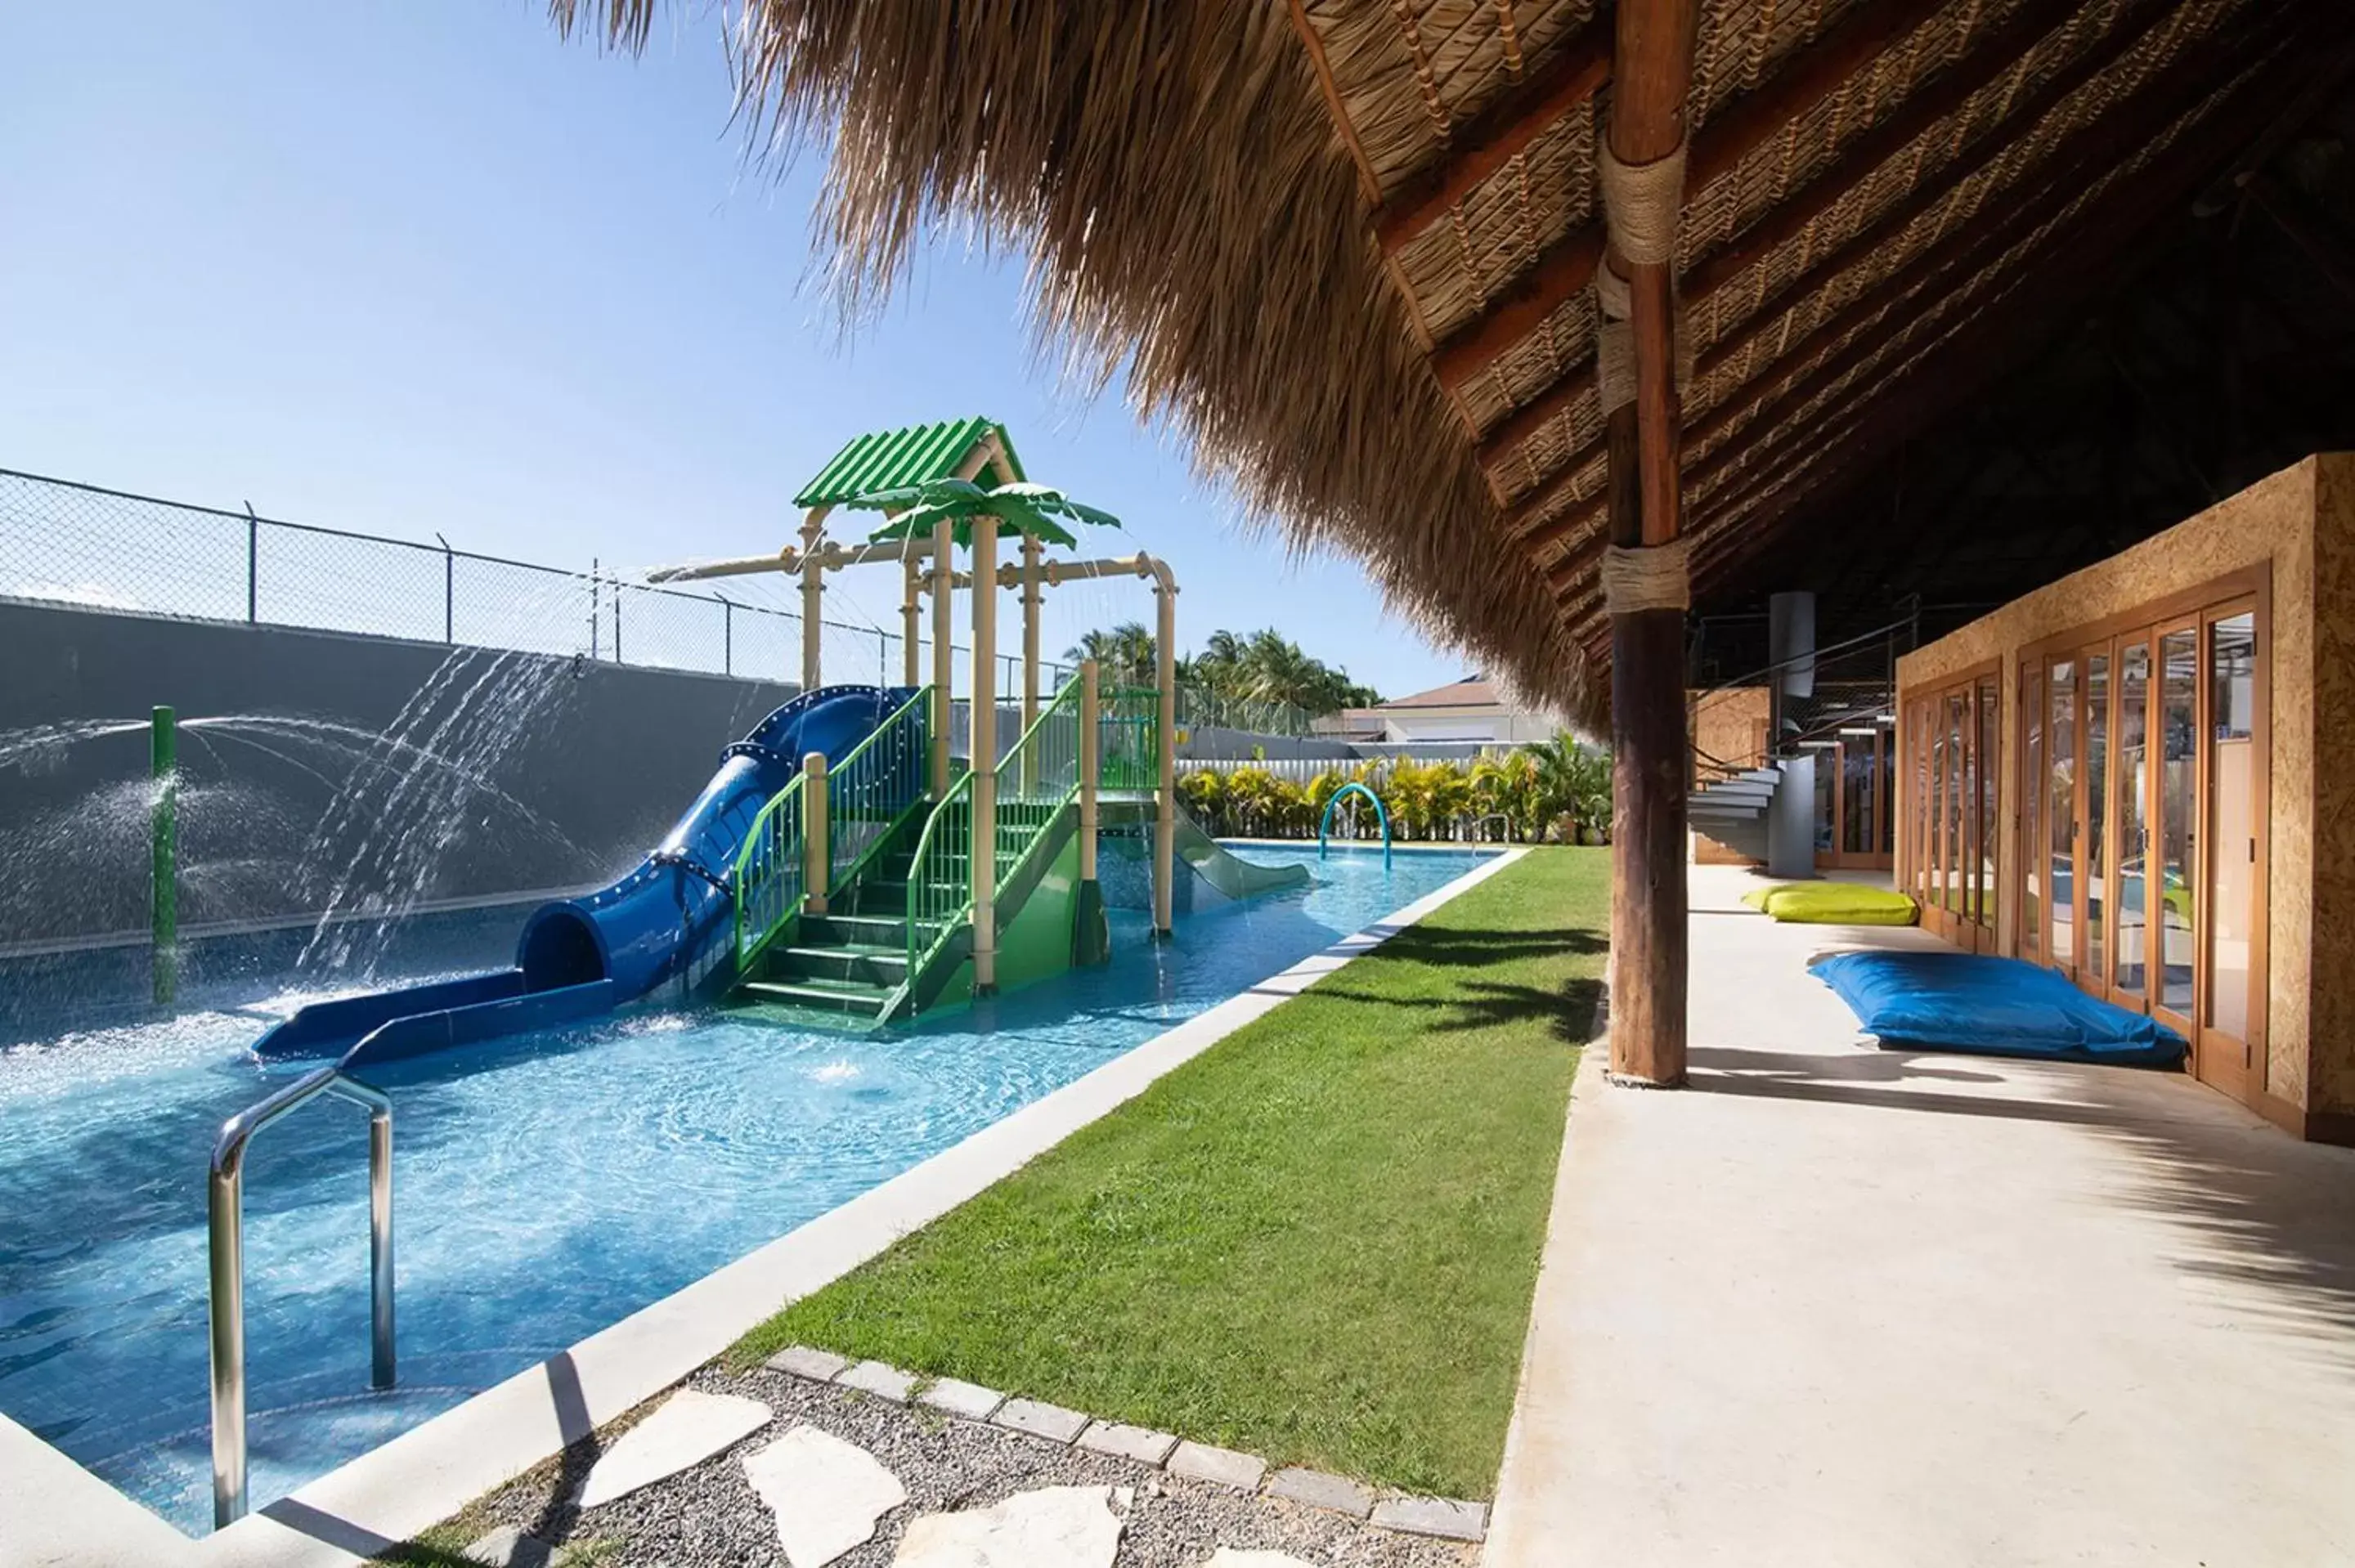 Children play ground, Swimming Pool in Dreams Onyx Resort & Spa - All Inclusive